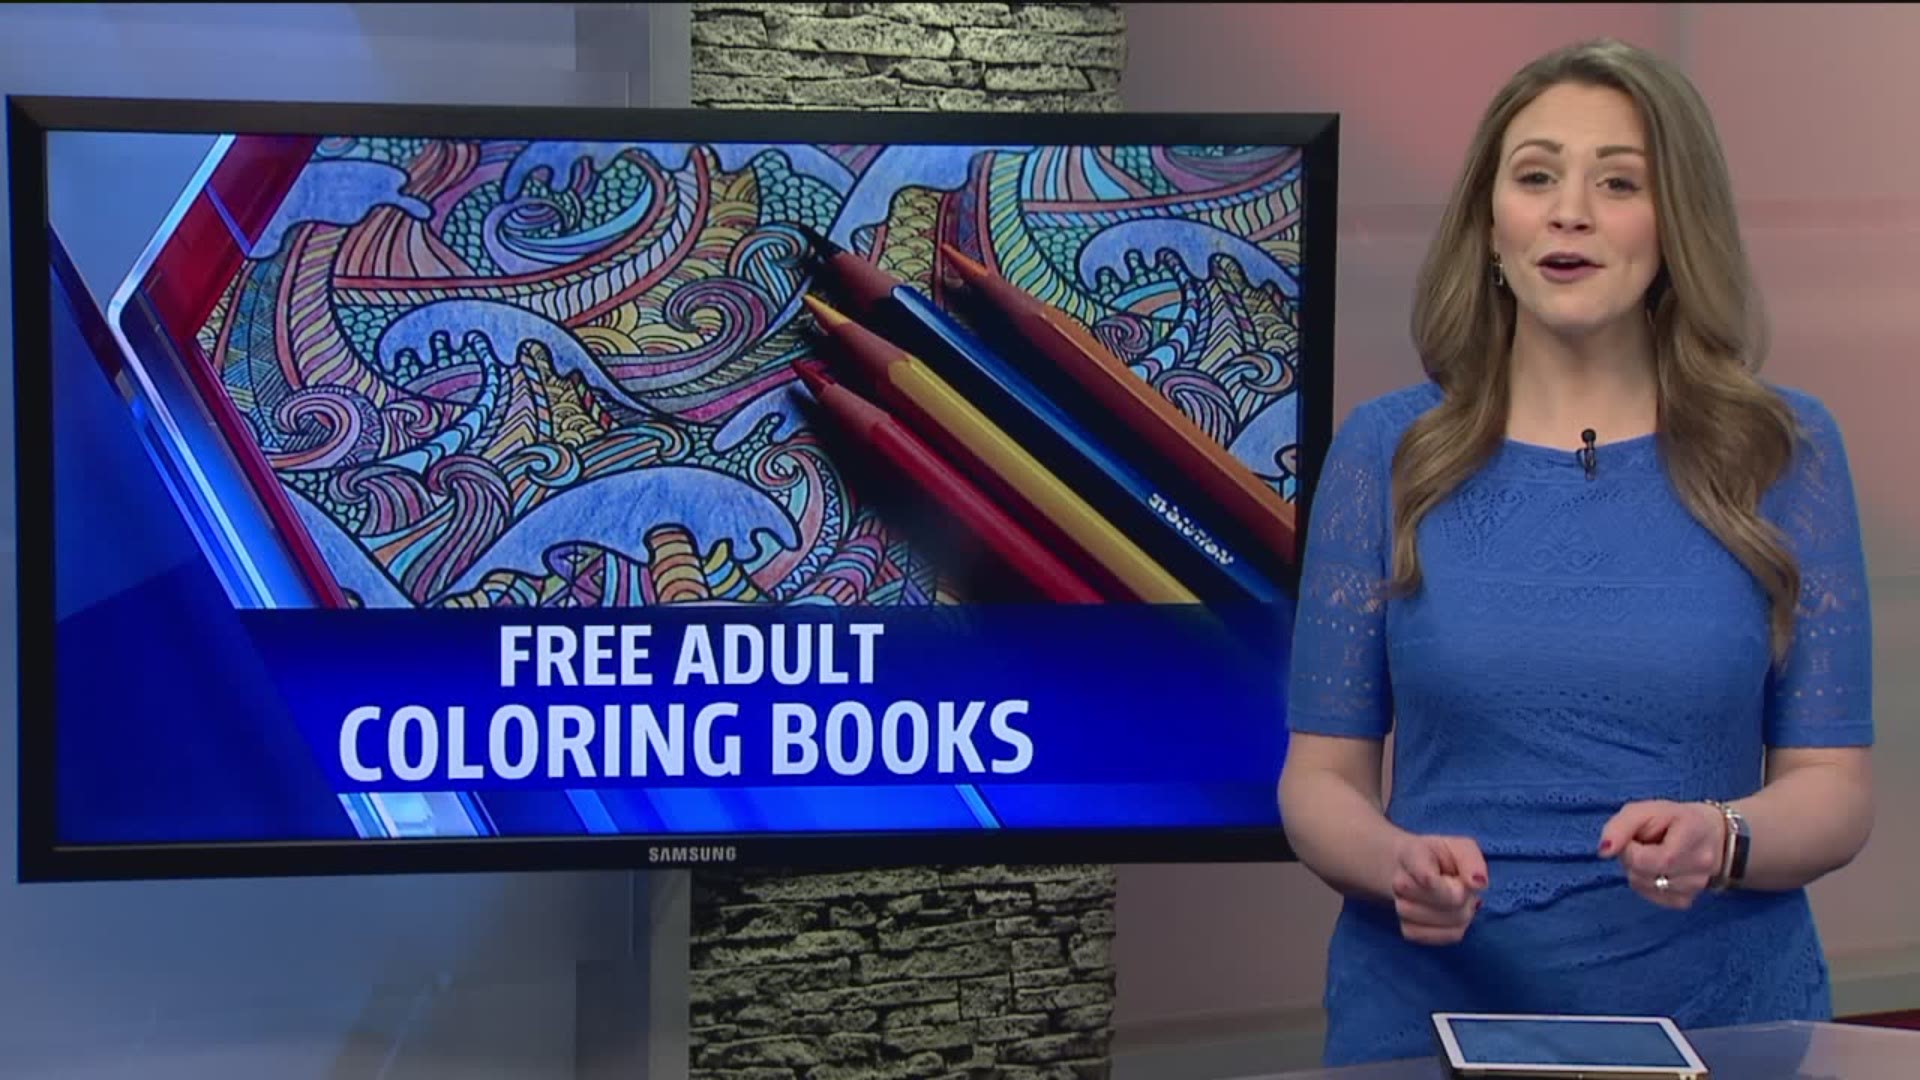 Studies have show coloring can improve your mood, make you more mindful, and reduce your mental health stress.